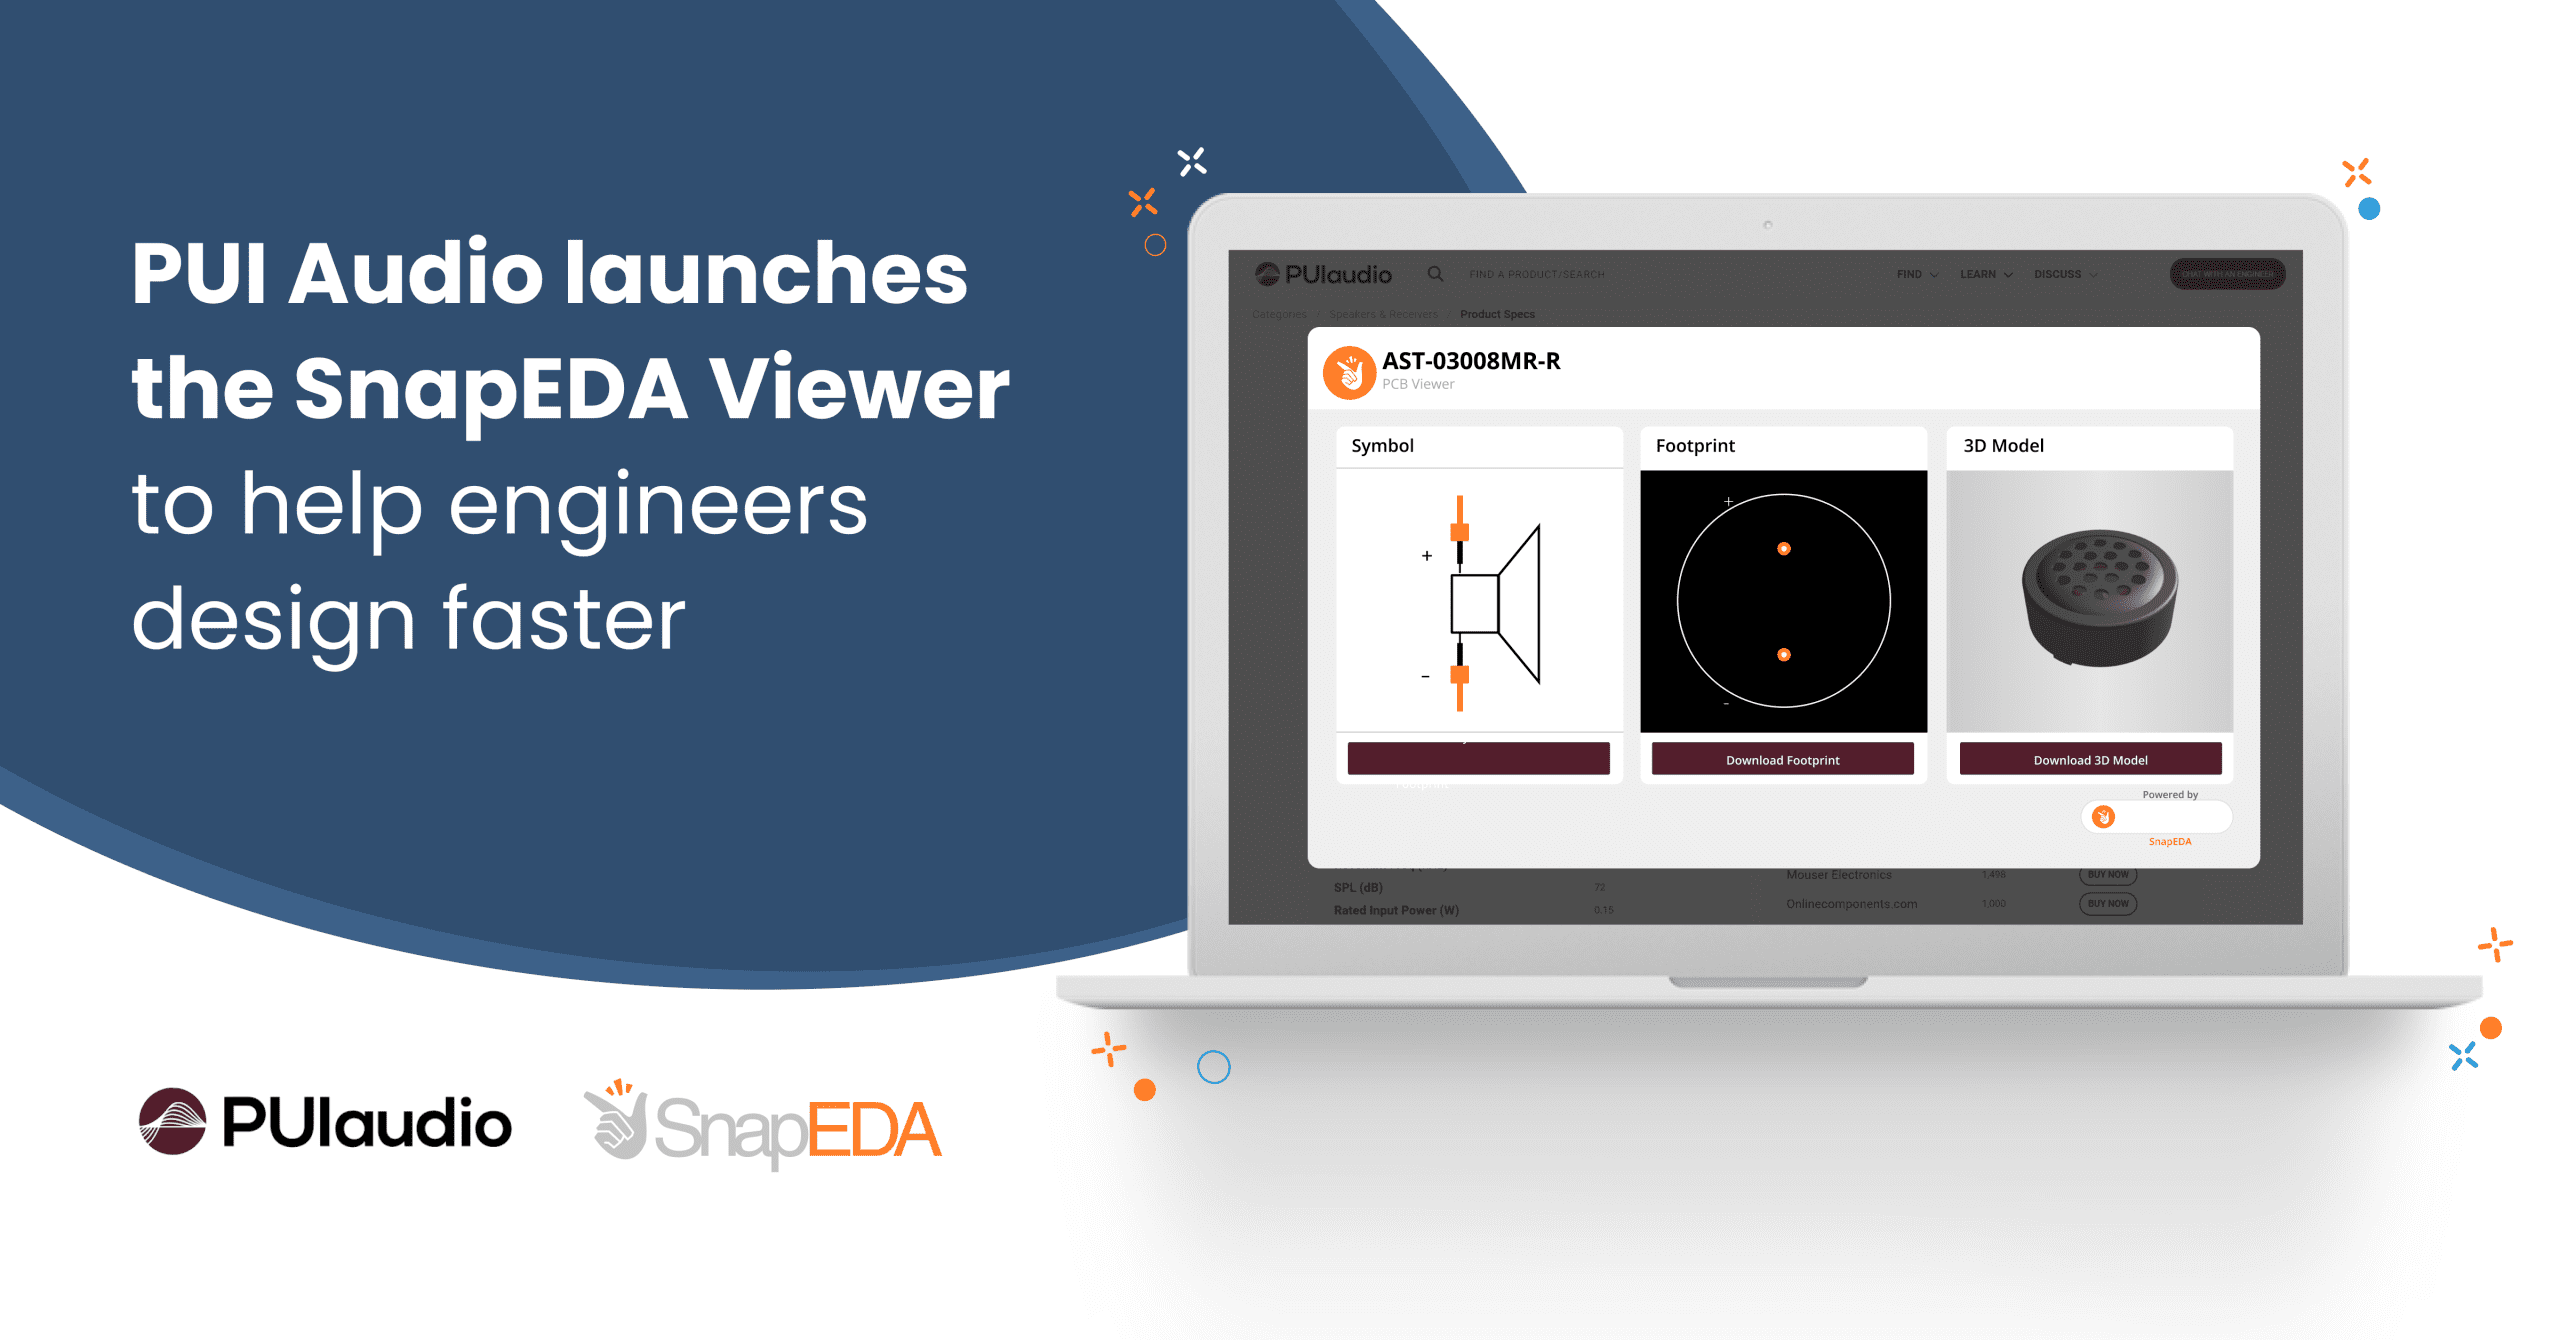 <strong>PUI Audio makes it easier to design electronics faster with new SnapEDA experience</strong>